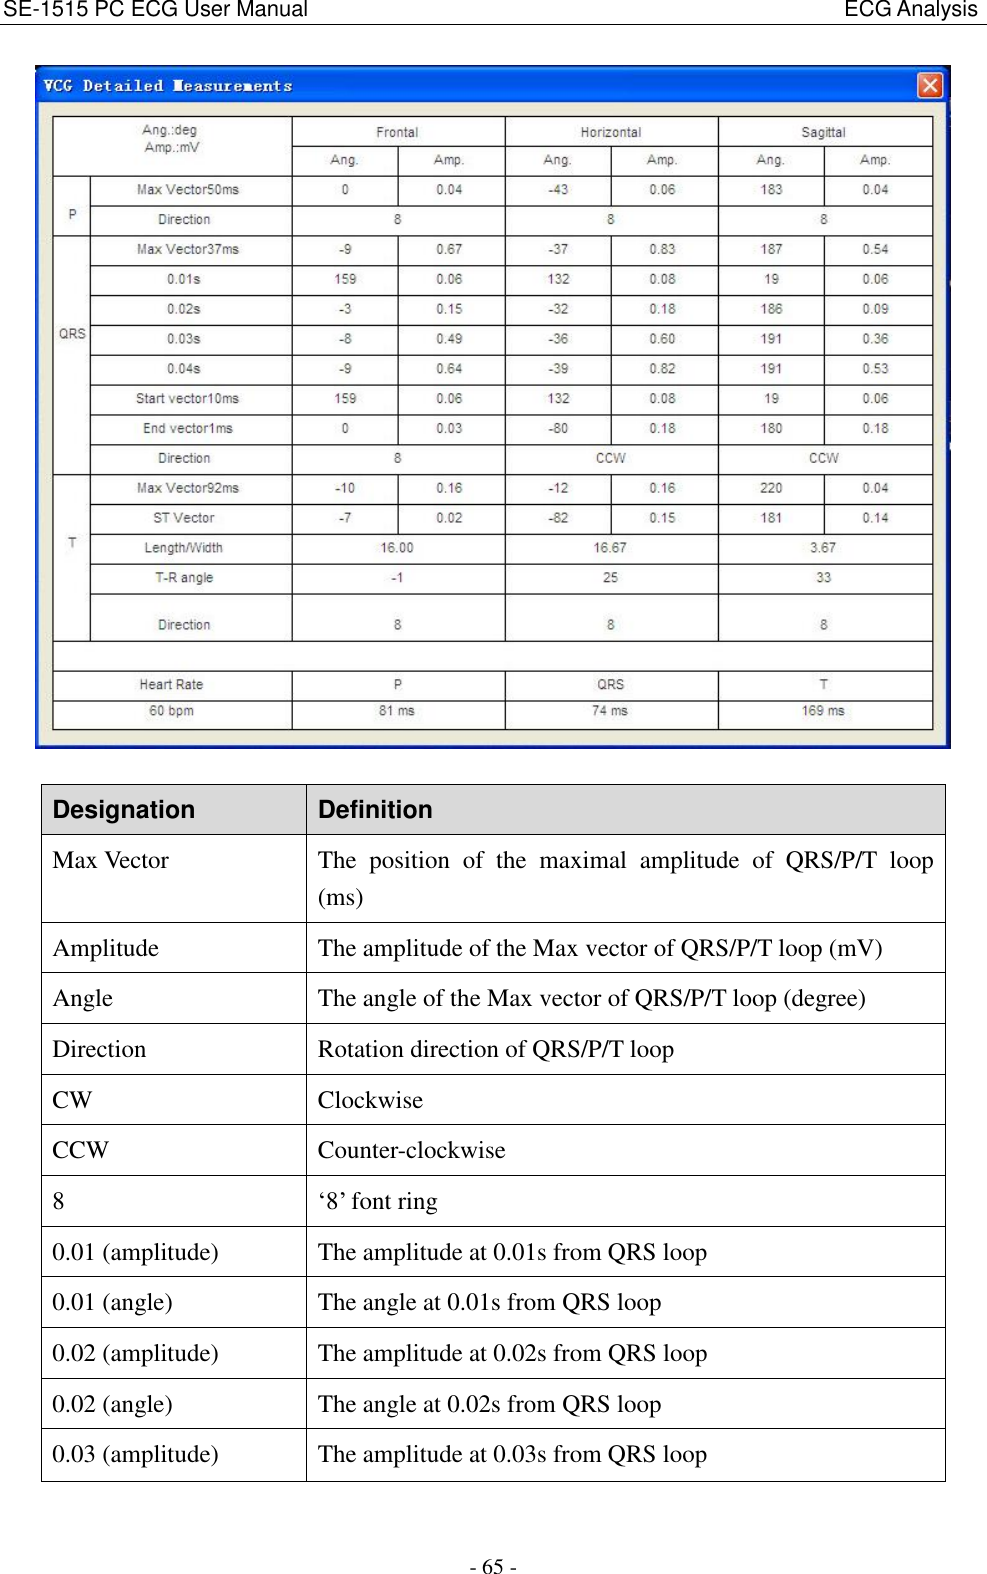 SE-1515 PC ECG User Manual                                                                                                  ECG Analysis - 65 -   Designation Definition Max Vector The  position  of  the  maximal  amplitude  of  QRS/P/T  loop (ms) Amplitude The amplitude of the Max vector of QRS/P/T loop (mV) Angle The angle of the Max vector of QRS/P/T loop (degree) Direction Rotation direction of QRS/P/T loop CW Clockwise CCW Counter-clockwise 8 ‘8’ font ring 0.01 (amplitude) The amplitude at 0.01s from QRS loop 0.01 (angle) The angle at 0.01s from QRS loop 0.02 (amplitude) The amplitude at 0.02s from QRS loop 0.02 (angle) The angle at 0.02s from QRS loop 0.03 (amplitude) The amplitude at 0.03s from QRS loop 